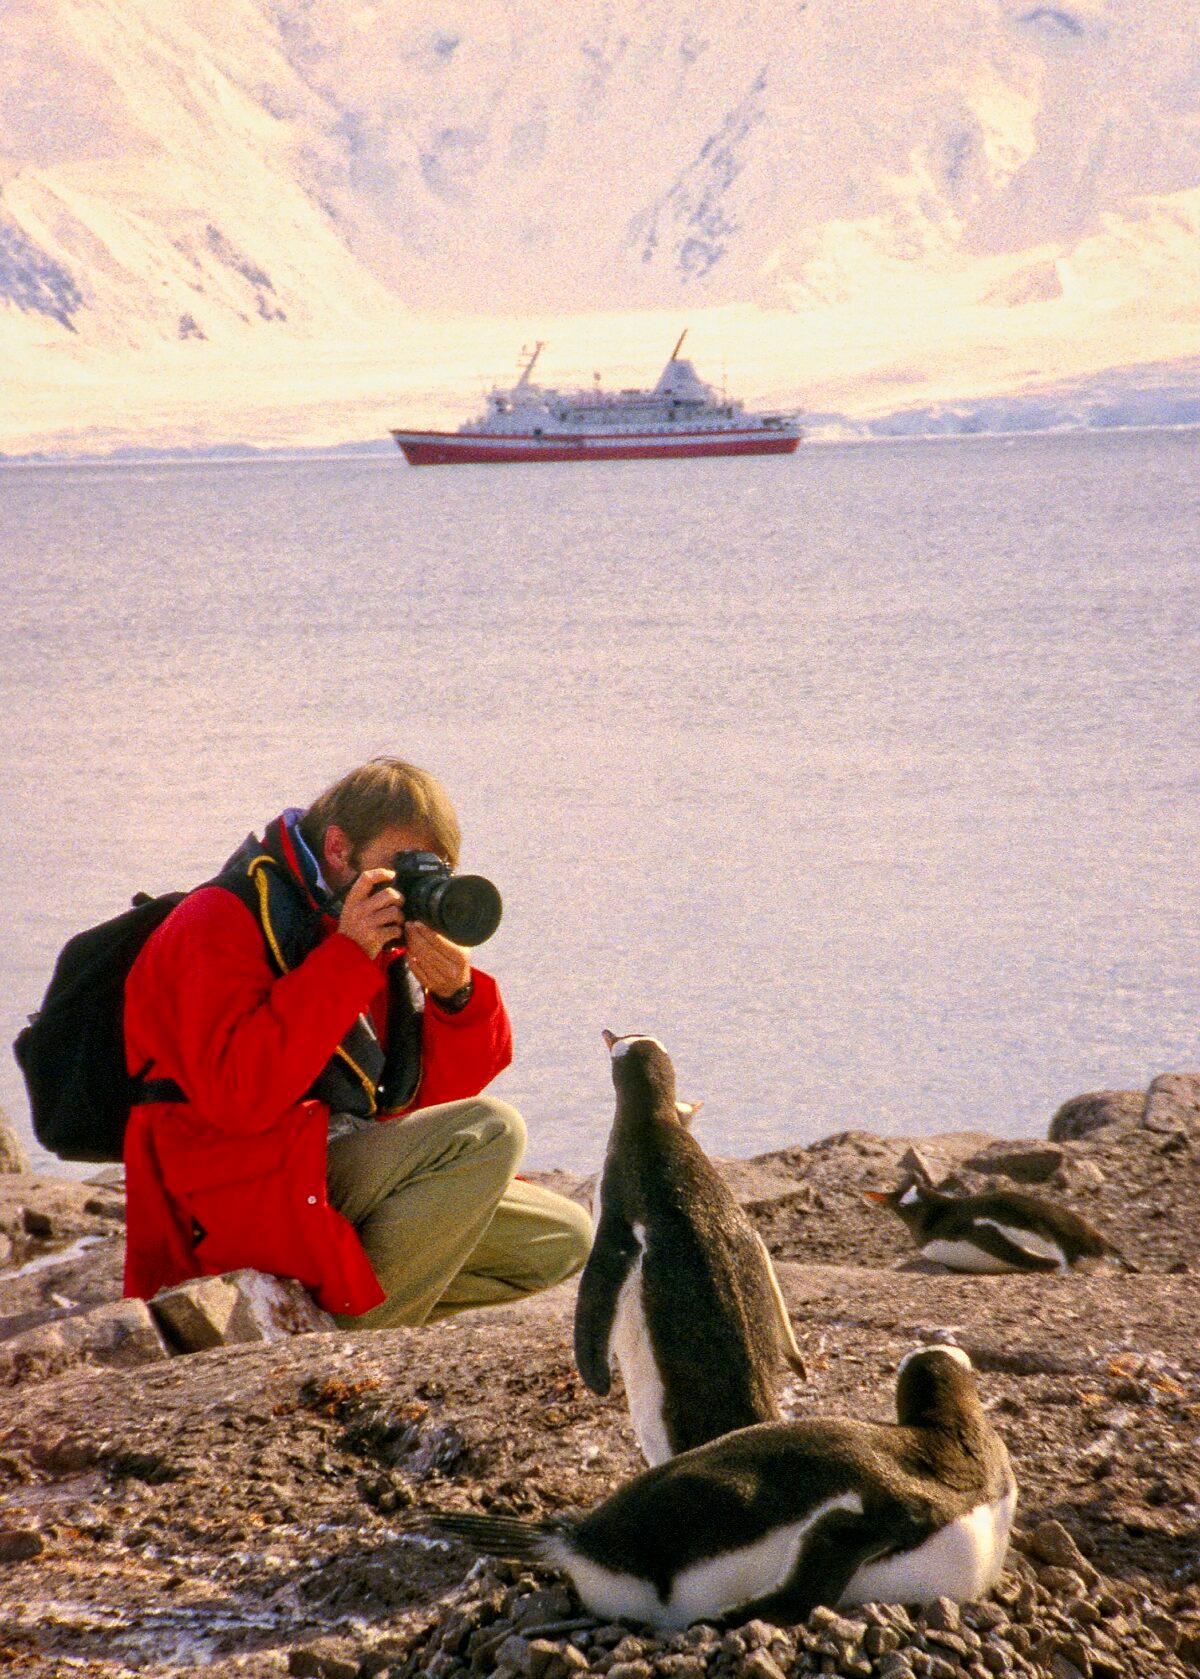 Tourists love that it’s so easy to get truly close-up photos of penguins. Often penguins waddle right up to you and all but pose. (Copyright Fred J. Eckert)